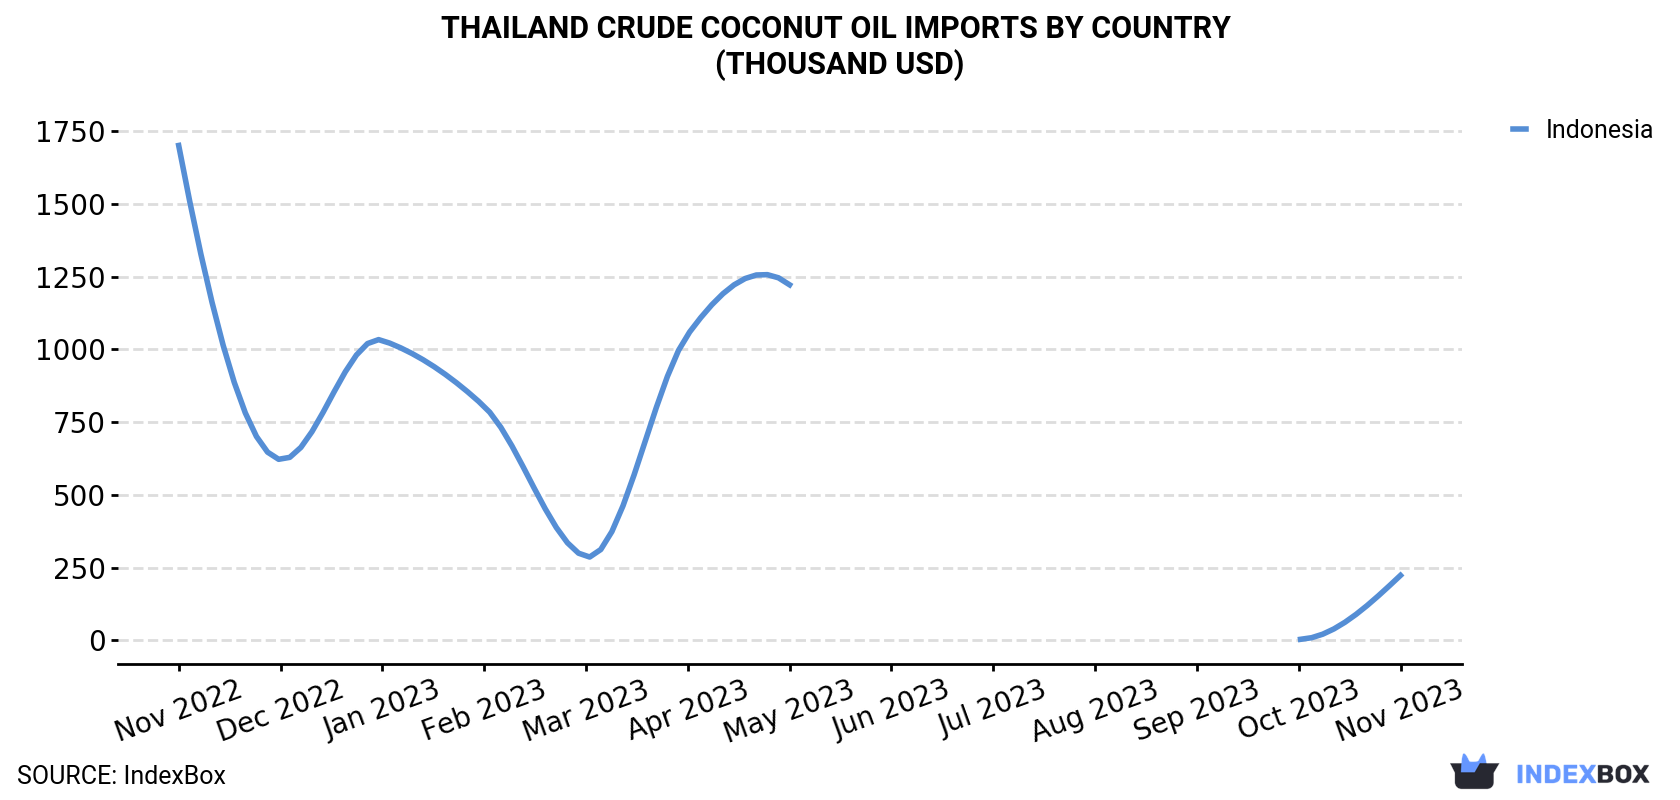 Thailand Crude Coconut Oil Imports By Country (Thousand USD)